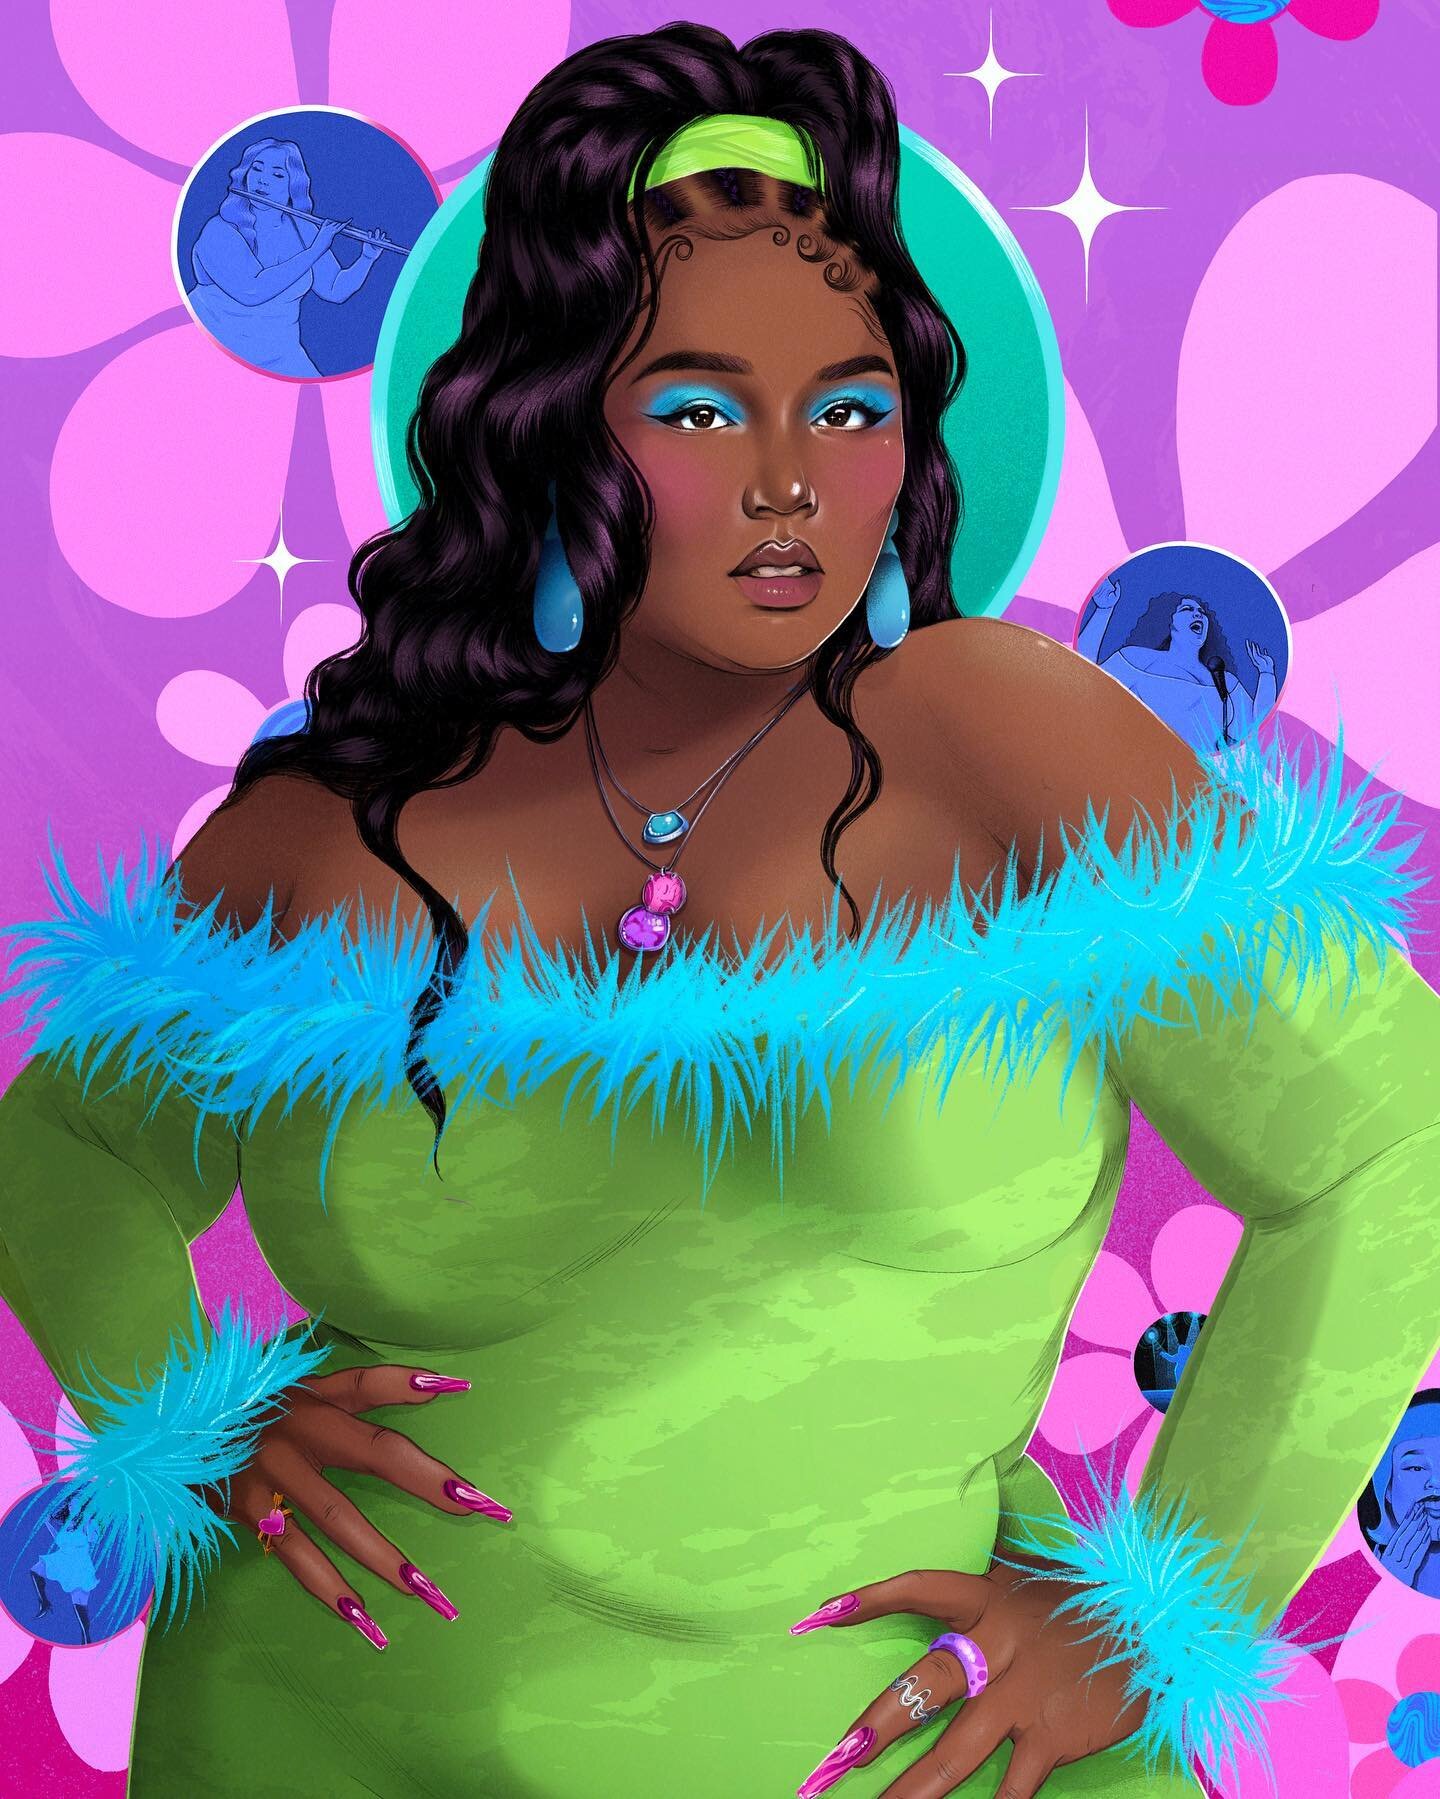 Here are some recent portraits I was fortunate enough to work on for @rebelgirls 💕✨

Lizzo for &ldquo;Rebel Girls Rock: 25 Tales of Women in Music&rdquo; and Koffee for &ldquo;Good Night Stories for Rebel Girls: 100 Inspiring Young Changemakers&rdqu